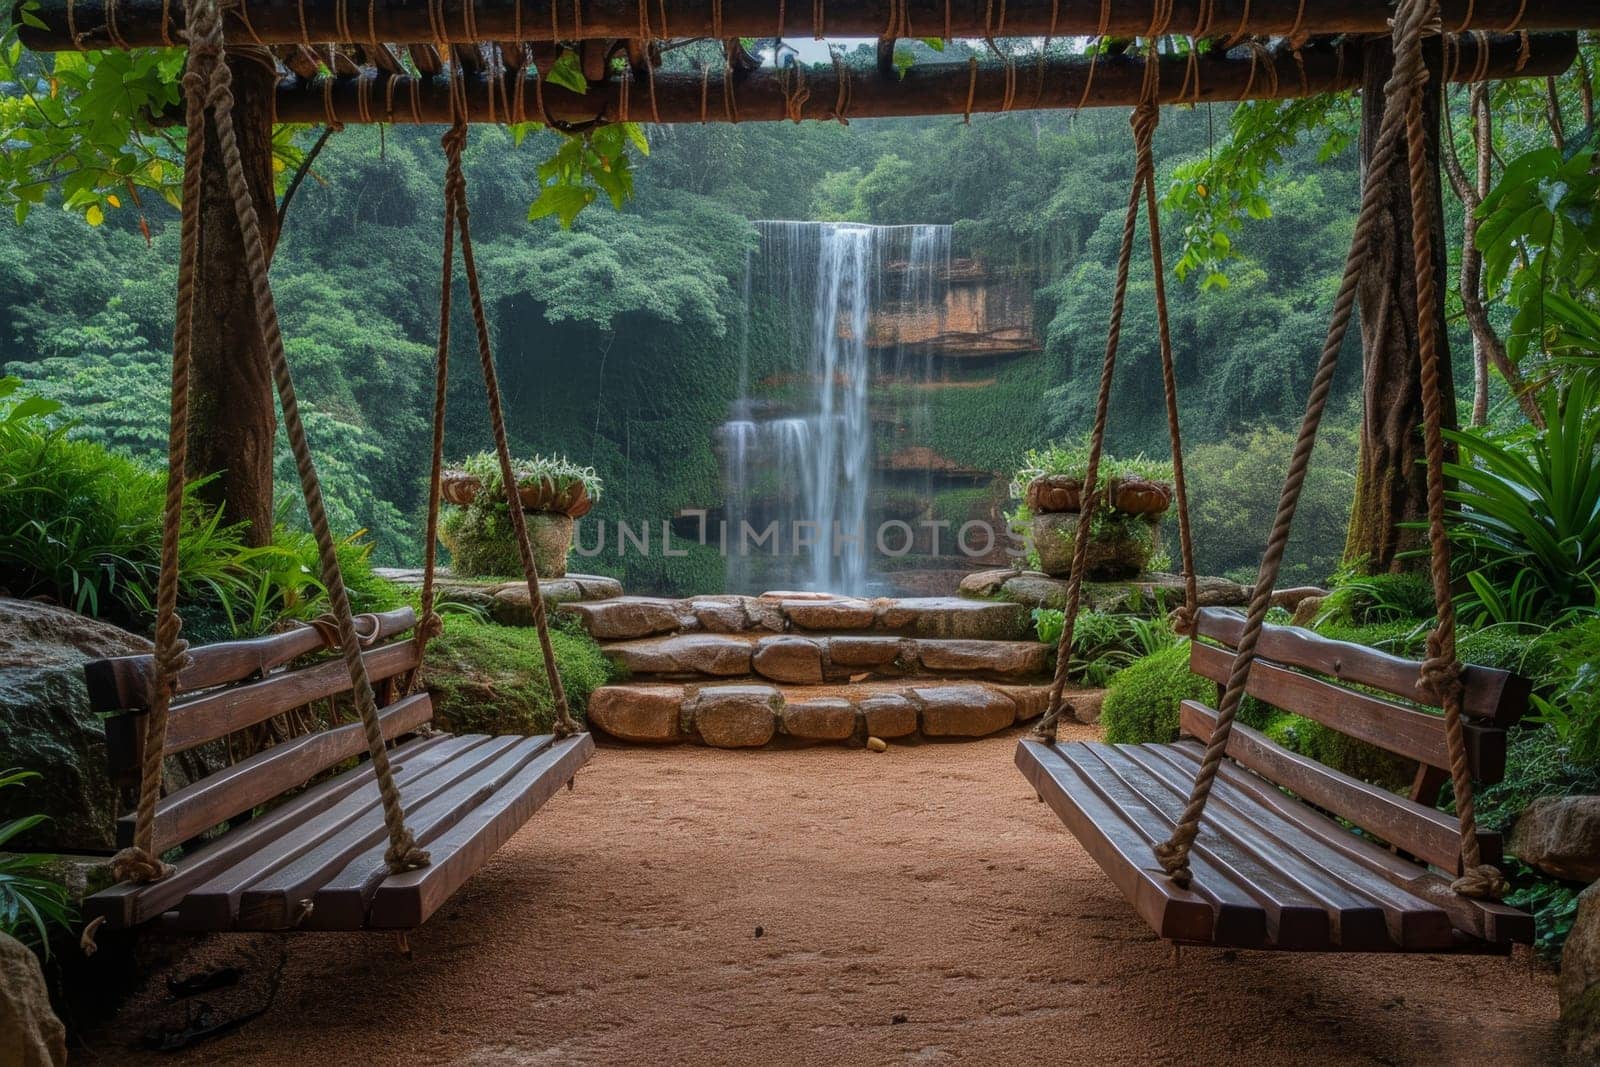 Stylish interior with swings on the background of a lake with a waterfall by Lobachad